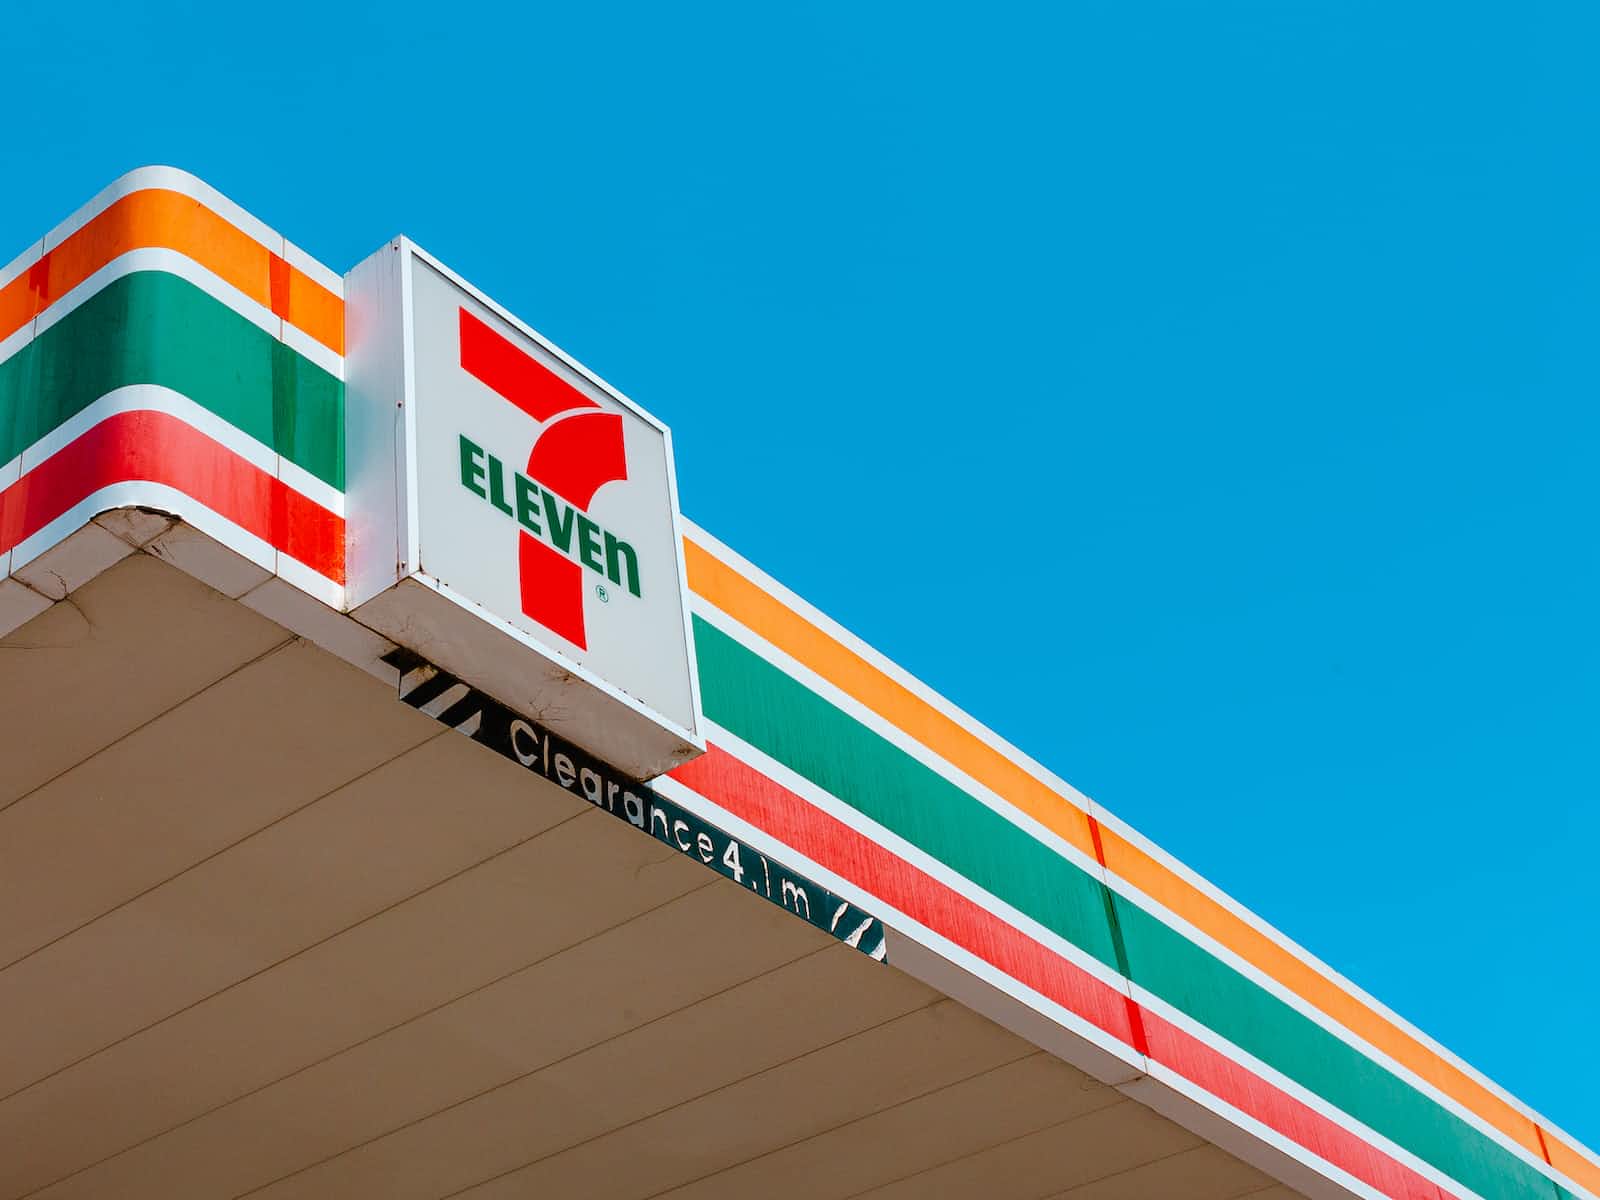 7-Eleven store sign